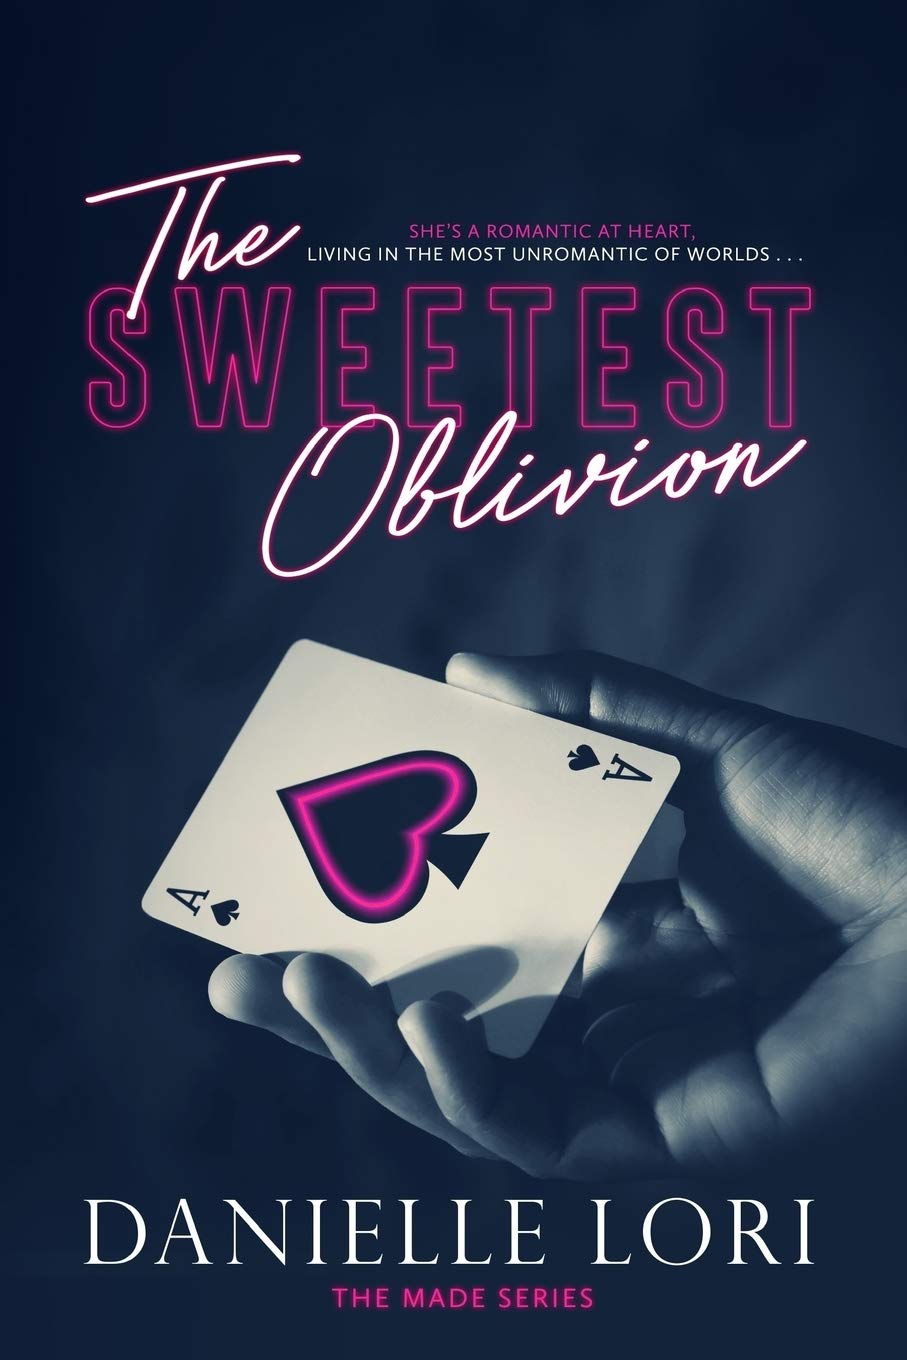 Made Series 1: the Sweetest Oblivion